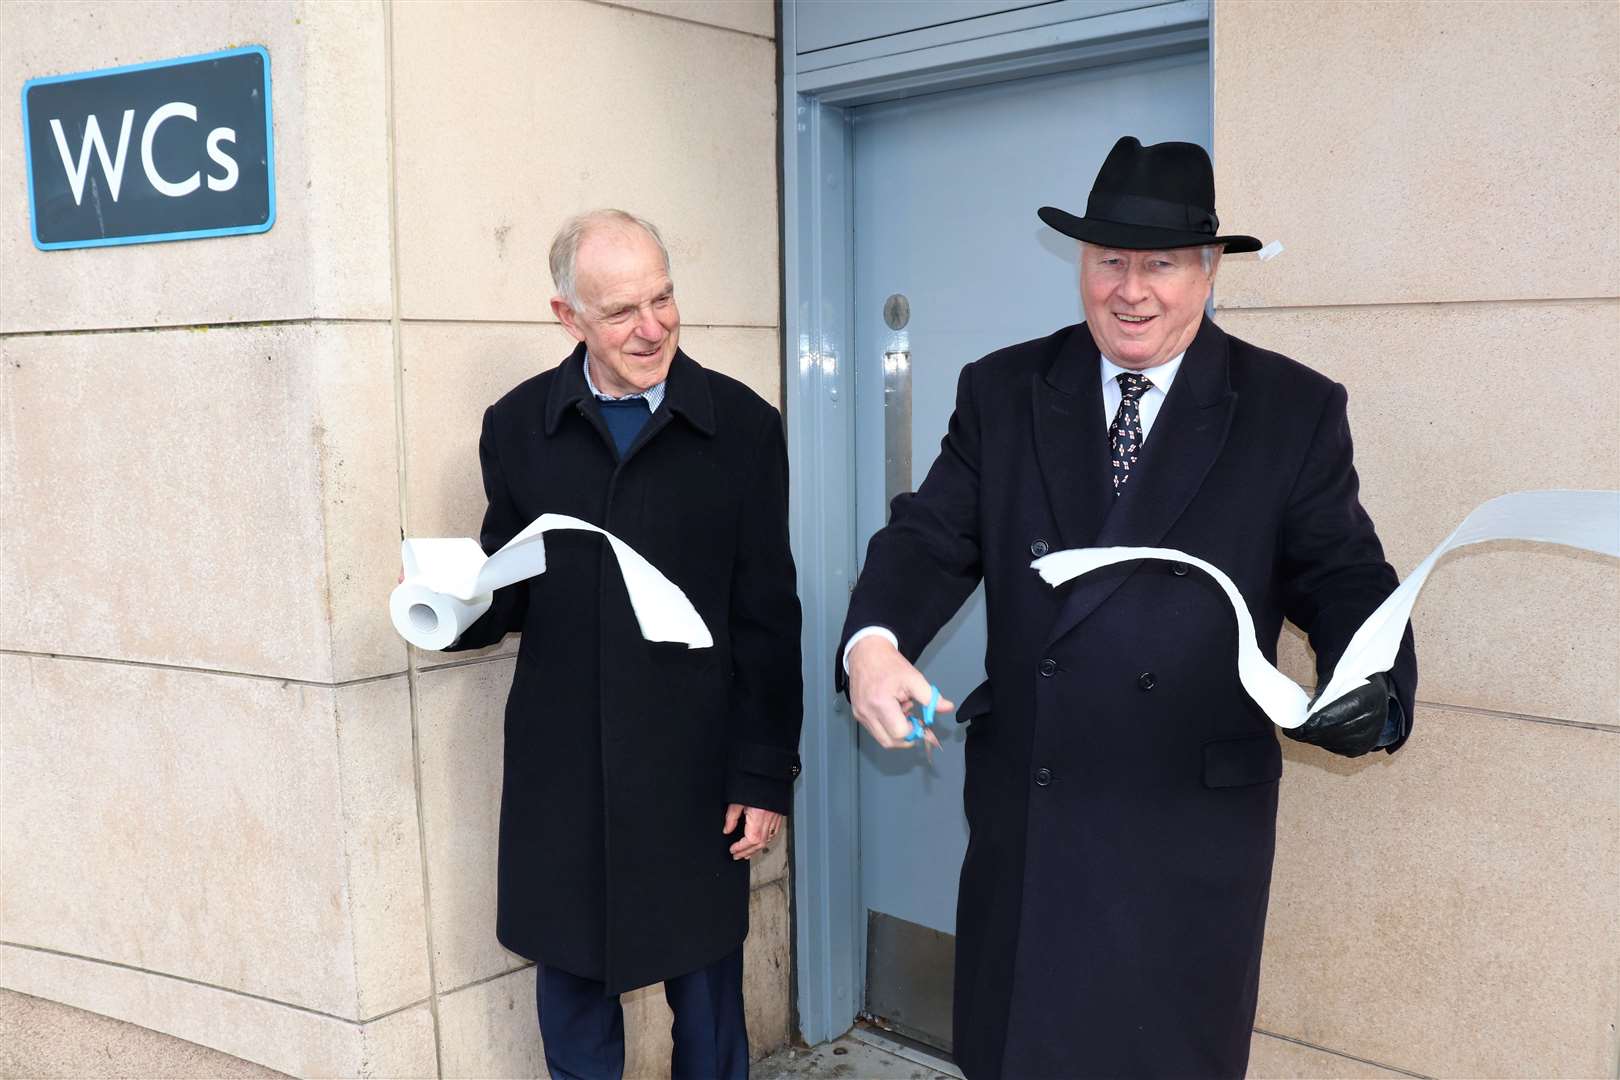 The toilets at Bouverie Place in Folkestone are open. Pictured is Cllr David Monk and Cllr John Collier officially re-opening the loos earlier this year